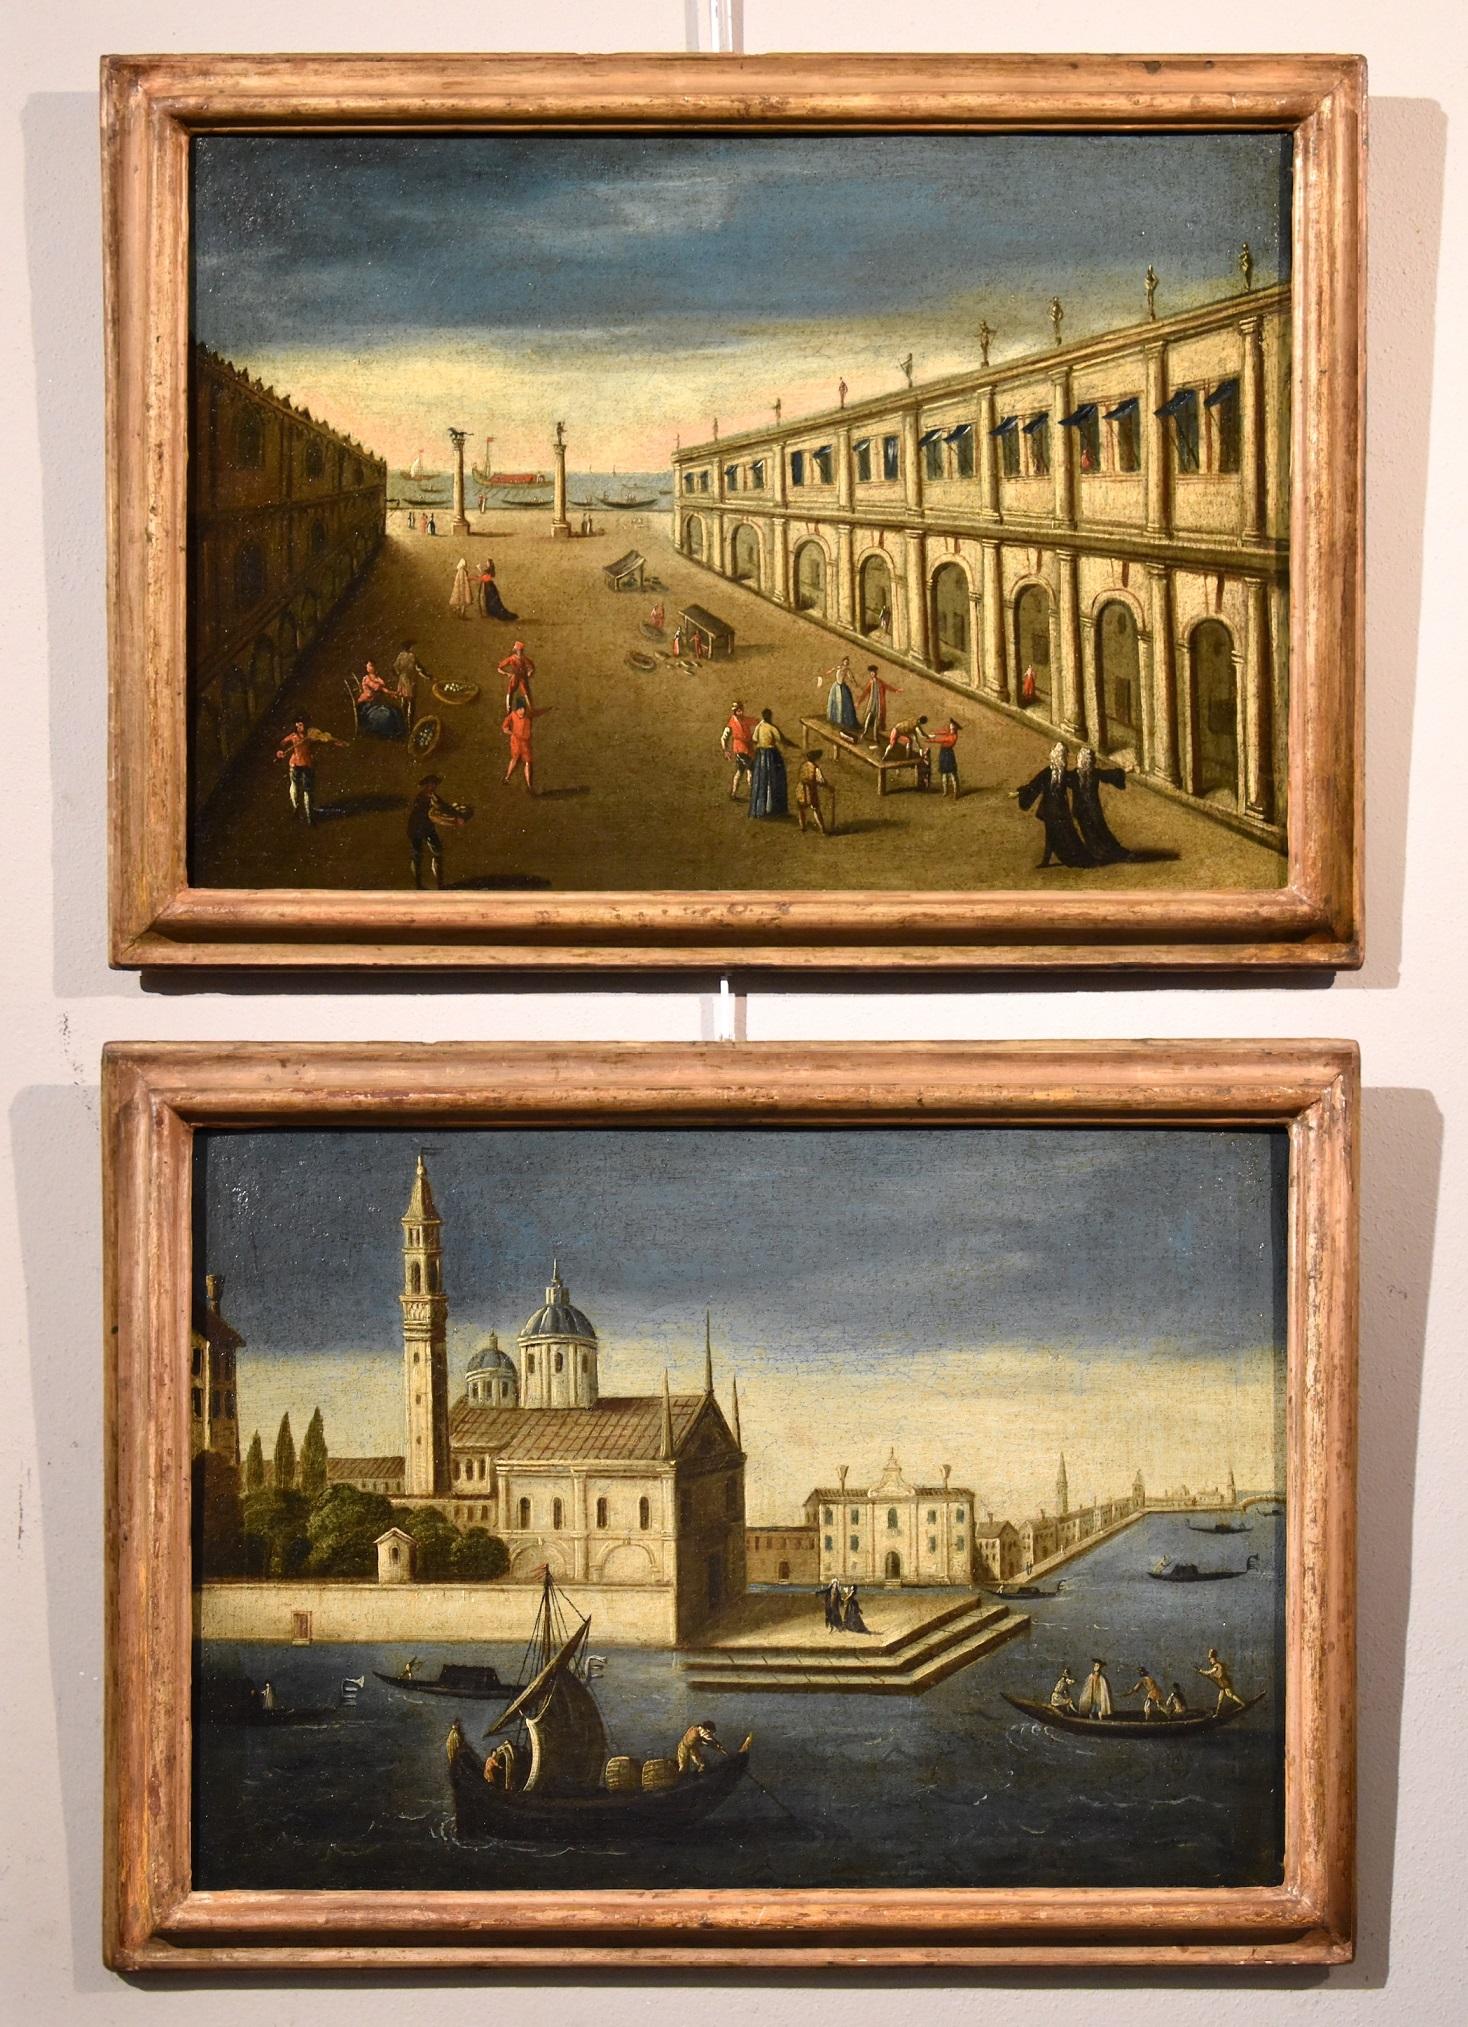 Eighteenth-century landscape painter Landscape Painting - Views See Venice Paint Oil on canvas old master 18th Century Canaletto Italian